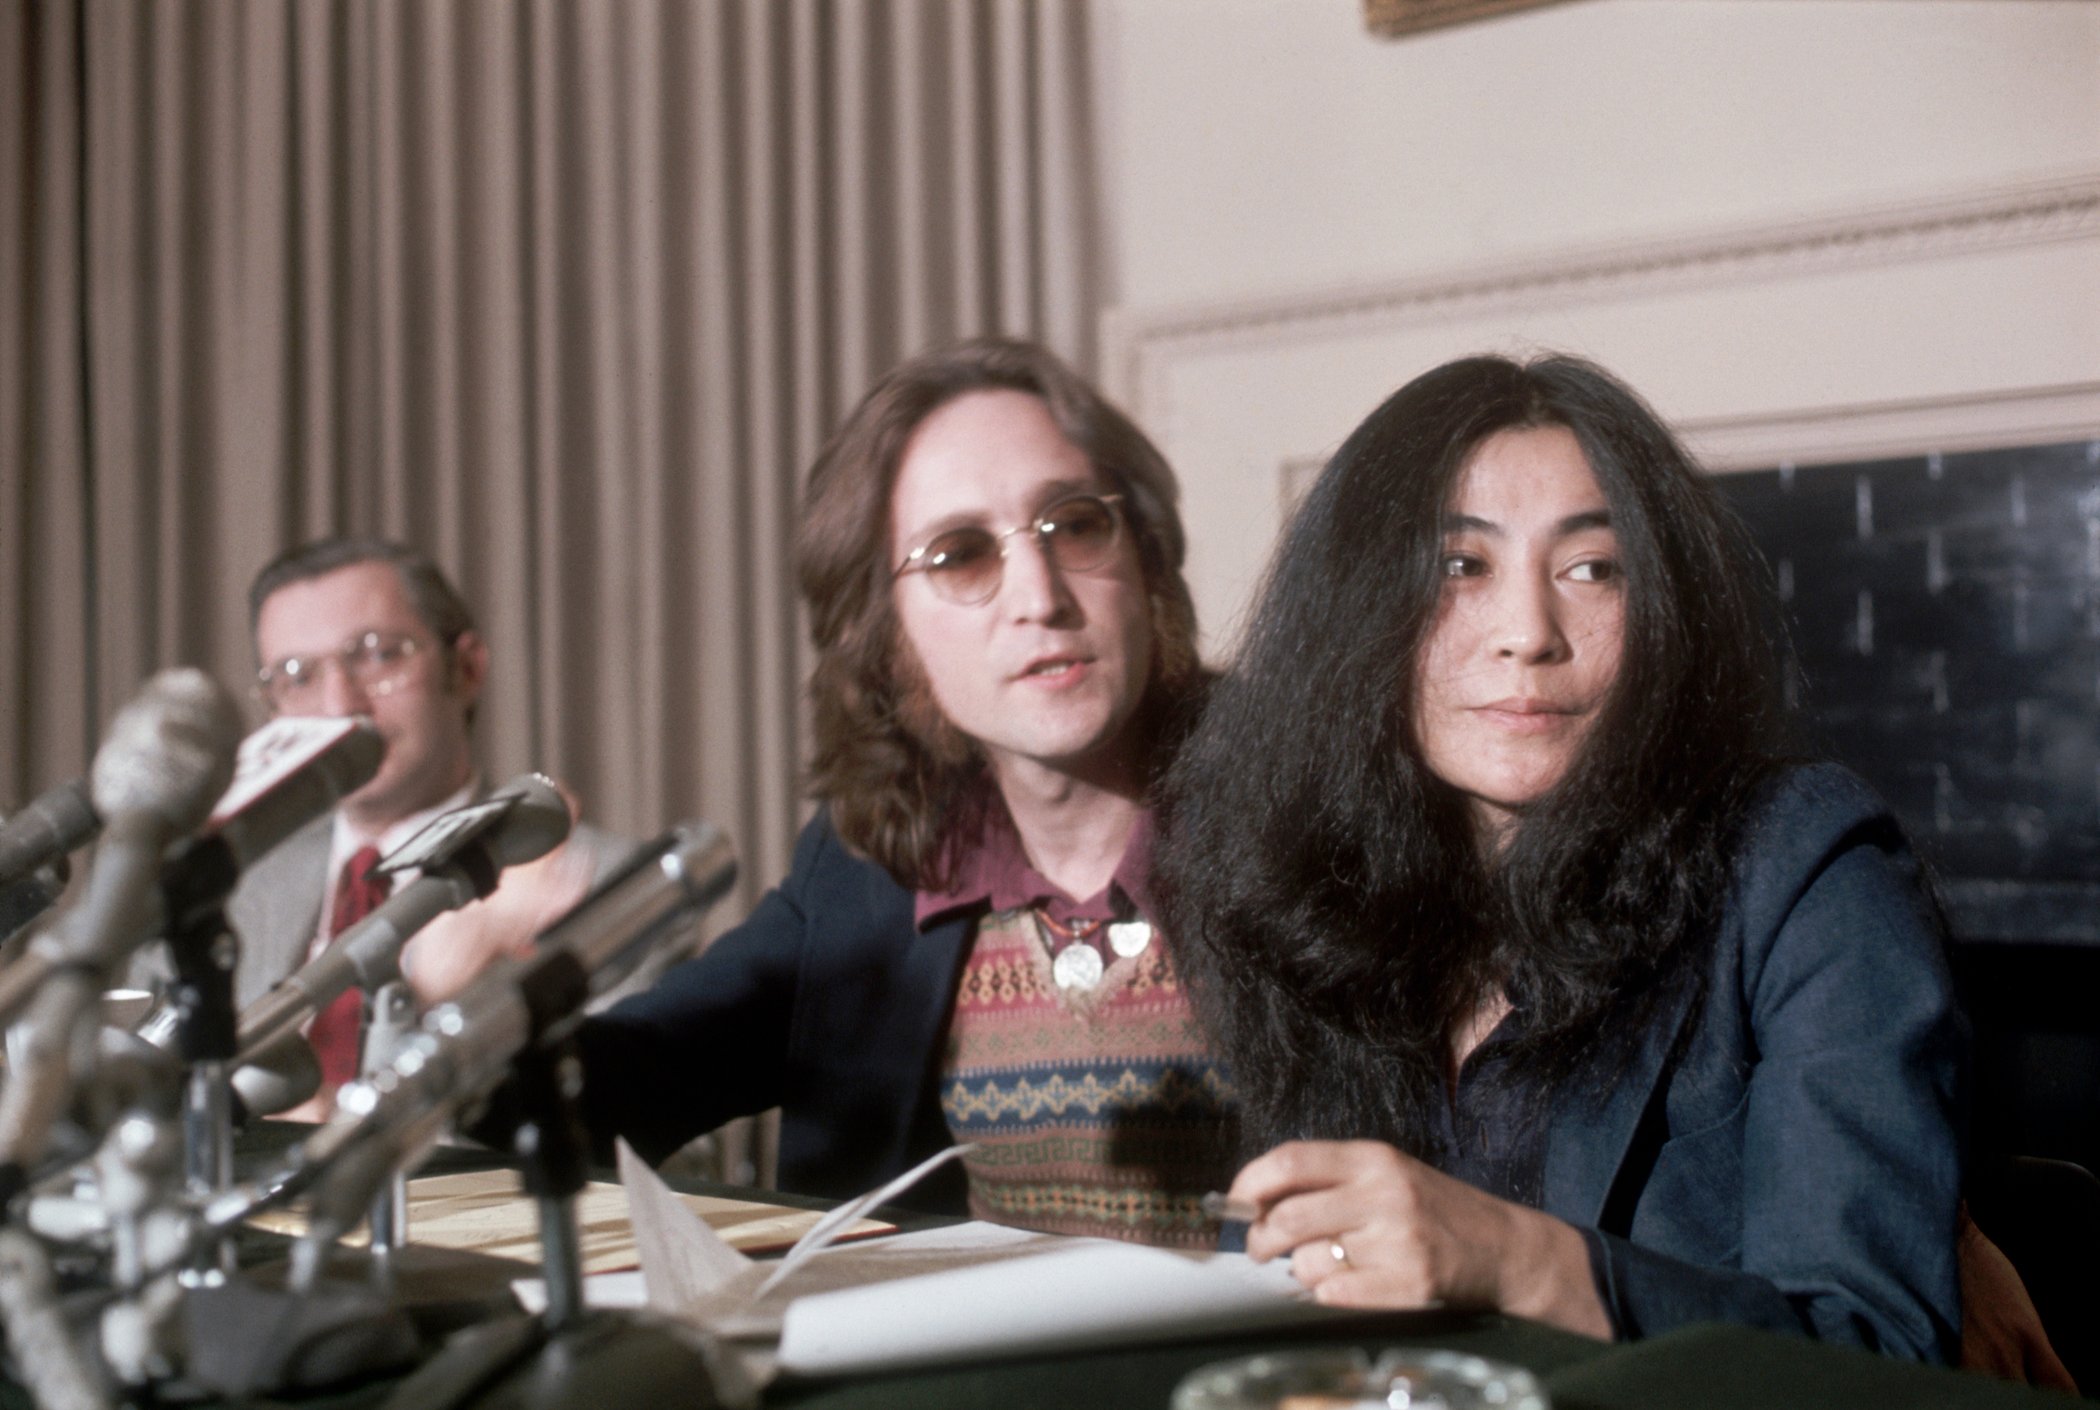 John Lennon, a former "Beatle" with wife, Yoko Ono, during a press conference